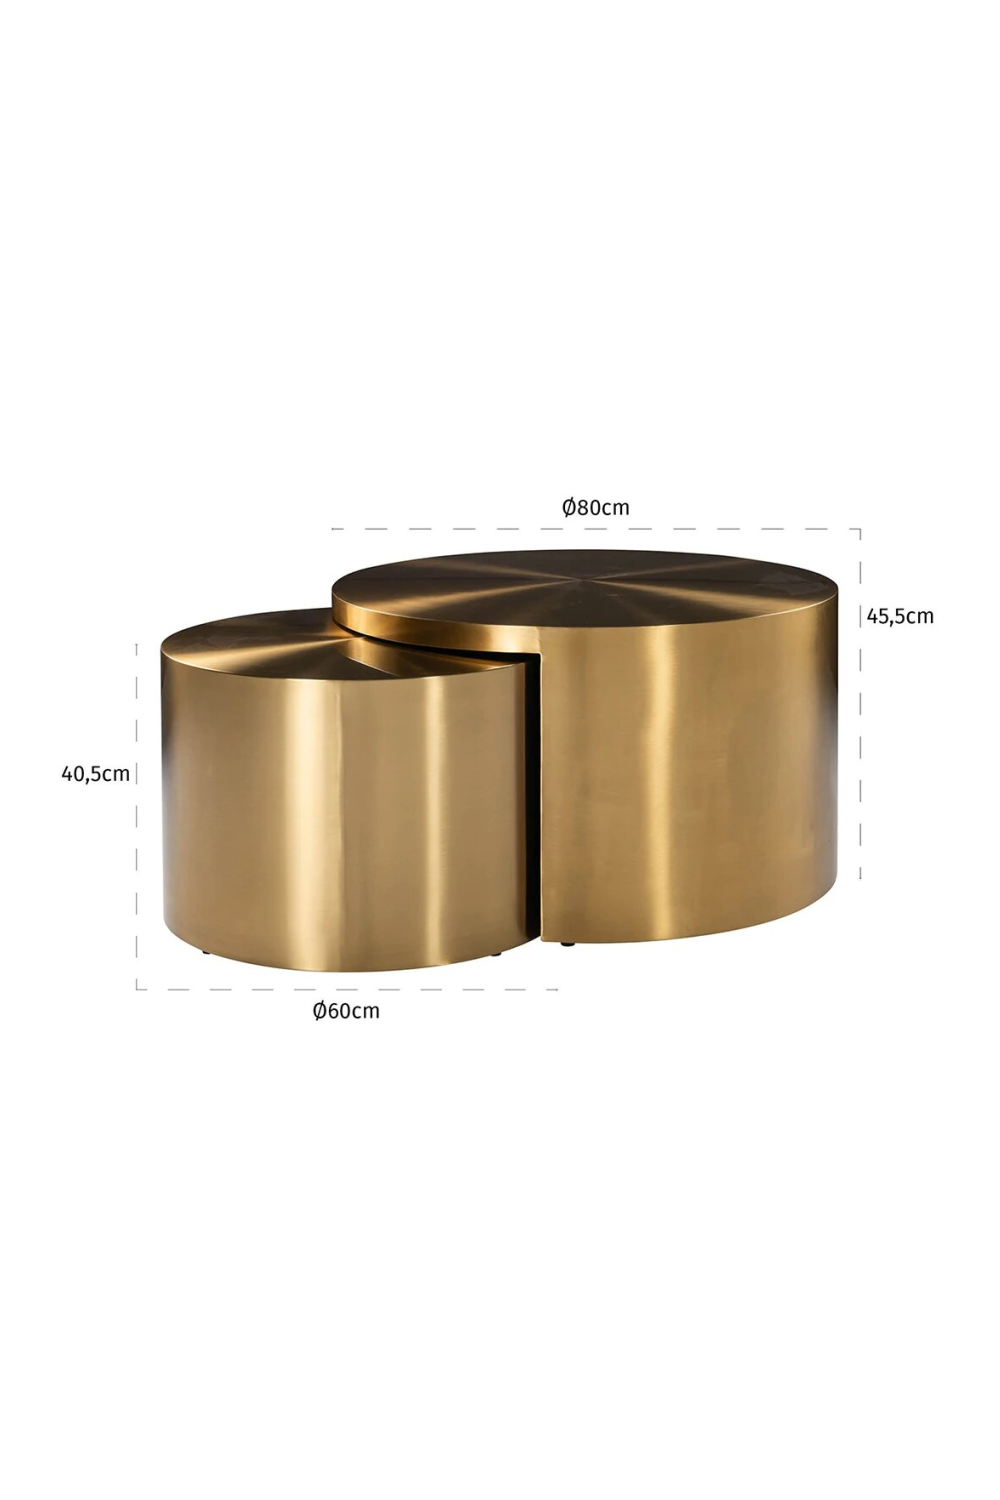 Round Brushed Gold Nesting Coffee Table | OROA.com